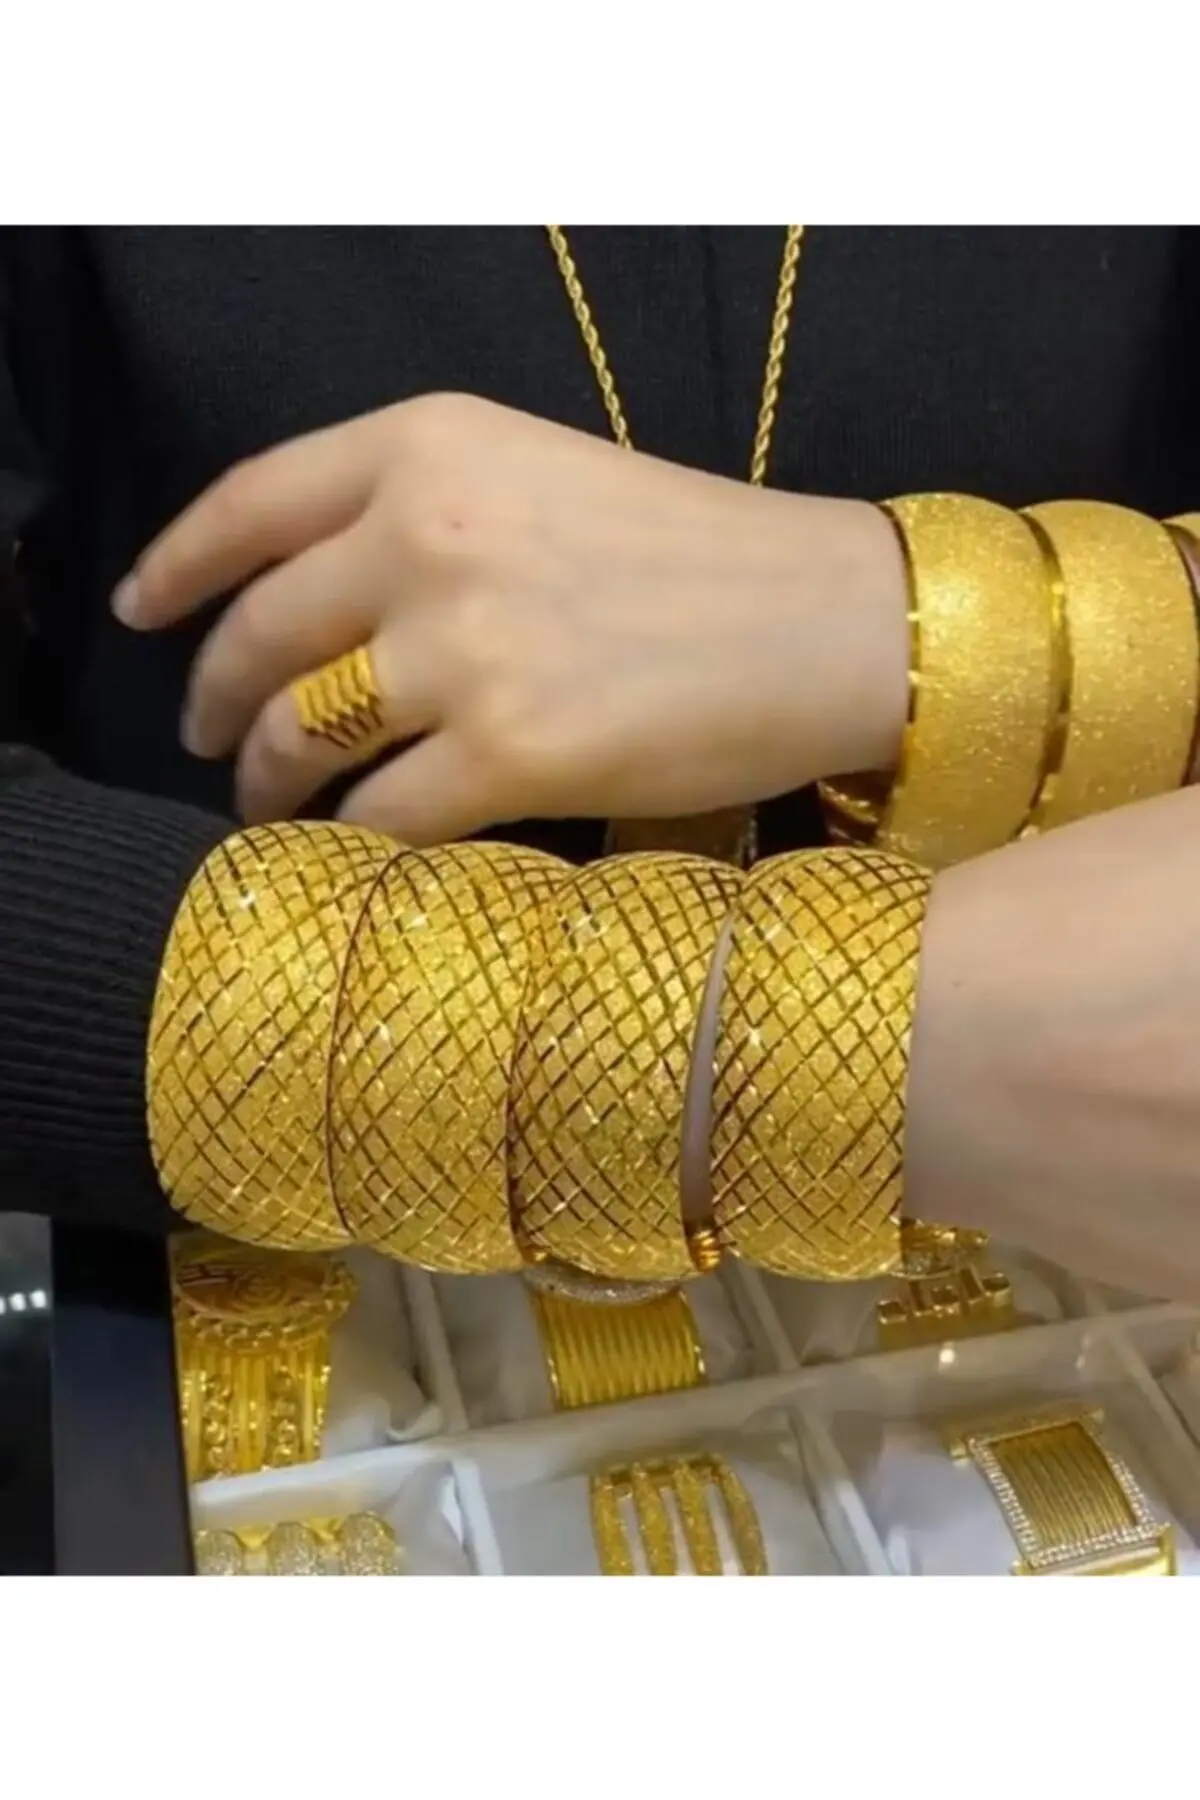 Gold Plated Women's Bracelet Campaign Price! 1 Pc